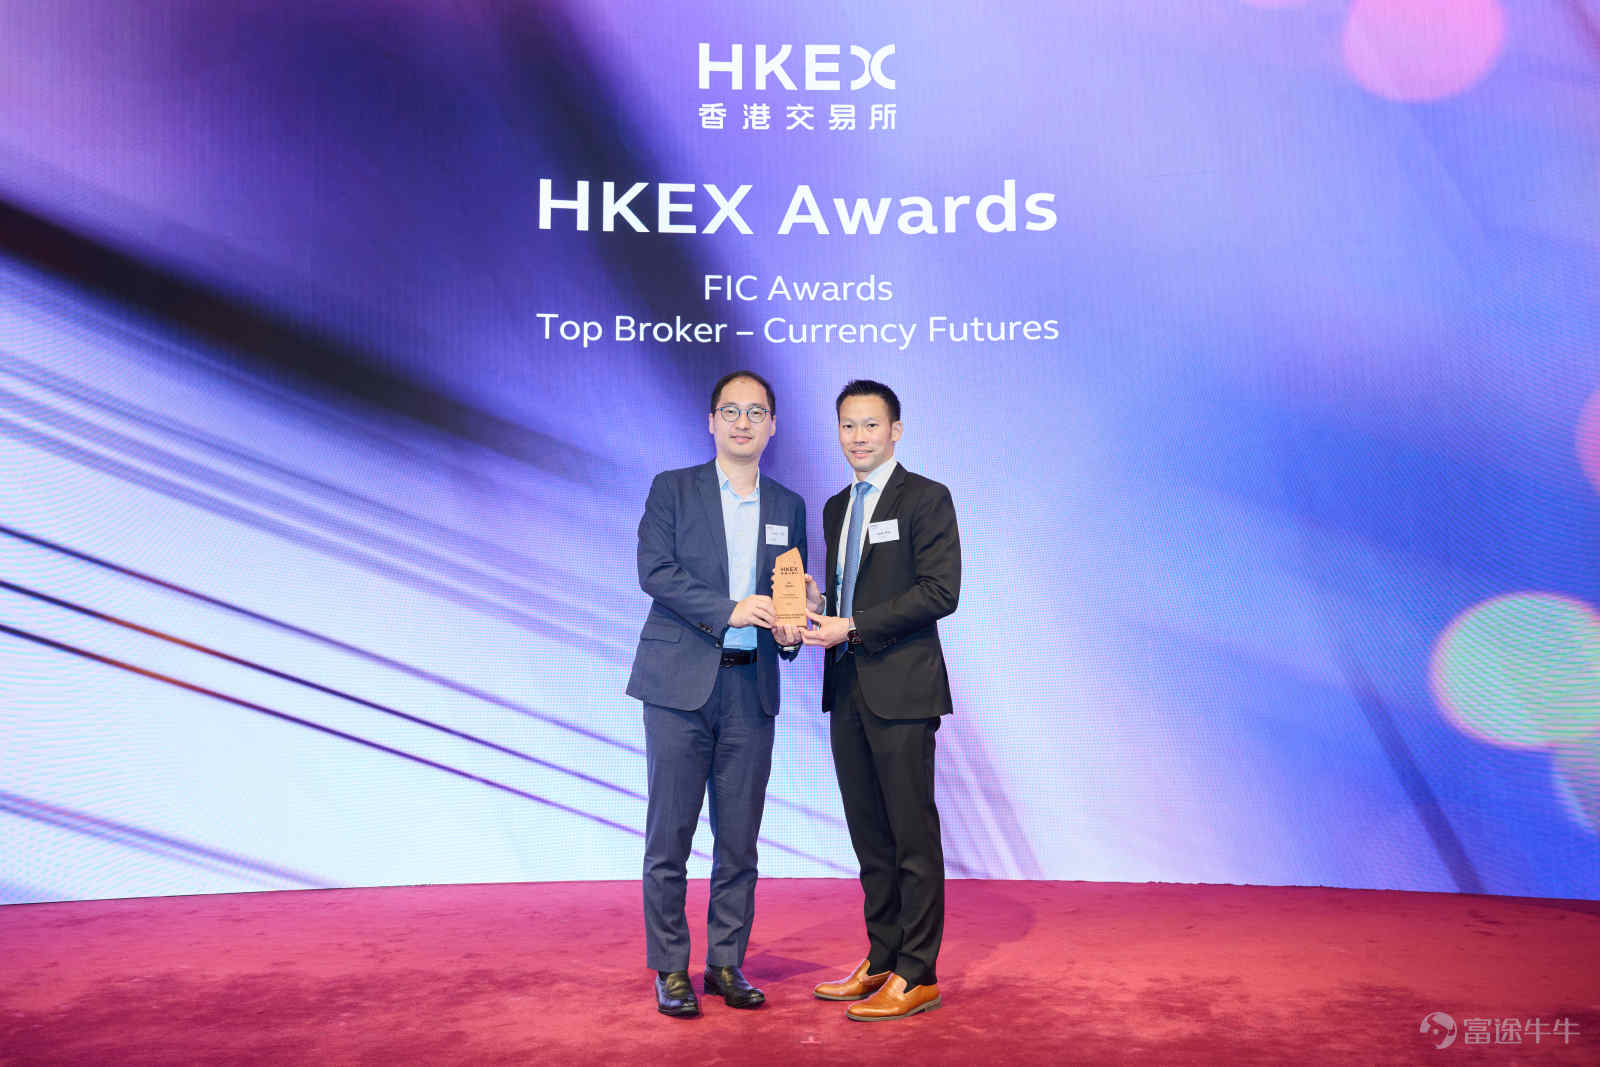 FUTUAN HAS WON THE HONG KONG STOCK EXCHANGE AWARD FOR “BEST RETAIL BROKER” FOR FIVE CONSECUTIVE YEARS IN WHICH FUTURES, OPTIONS AND CURRENCY FUTURES TRADING VOL...